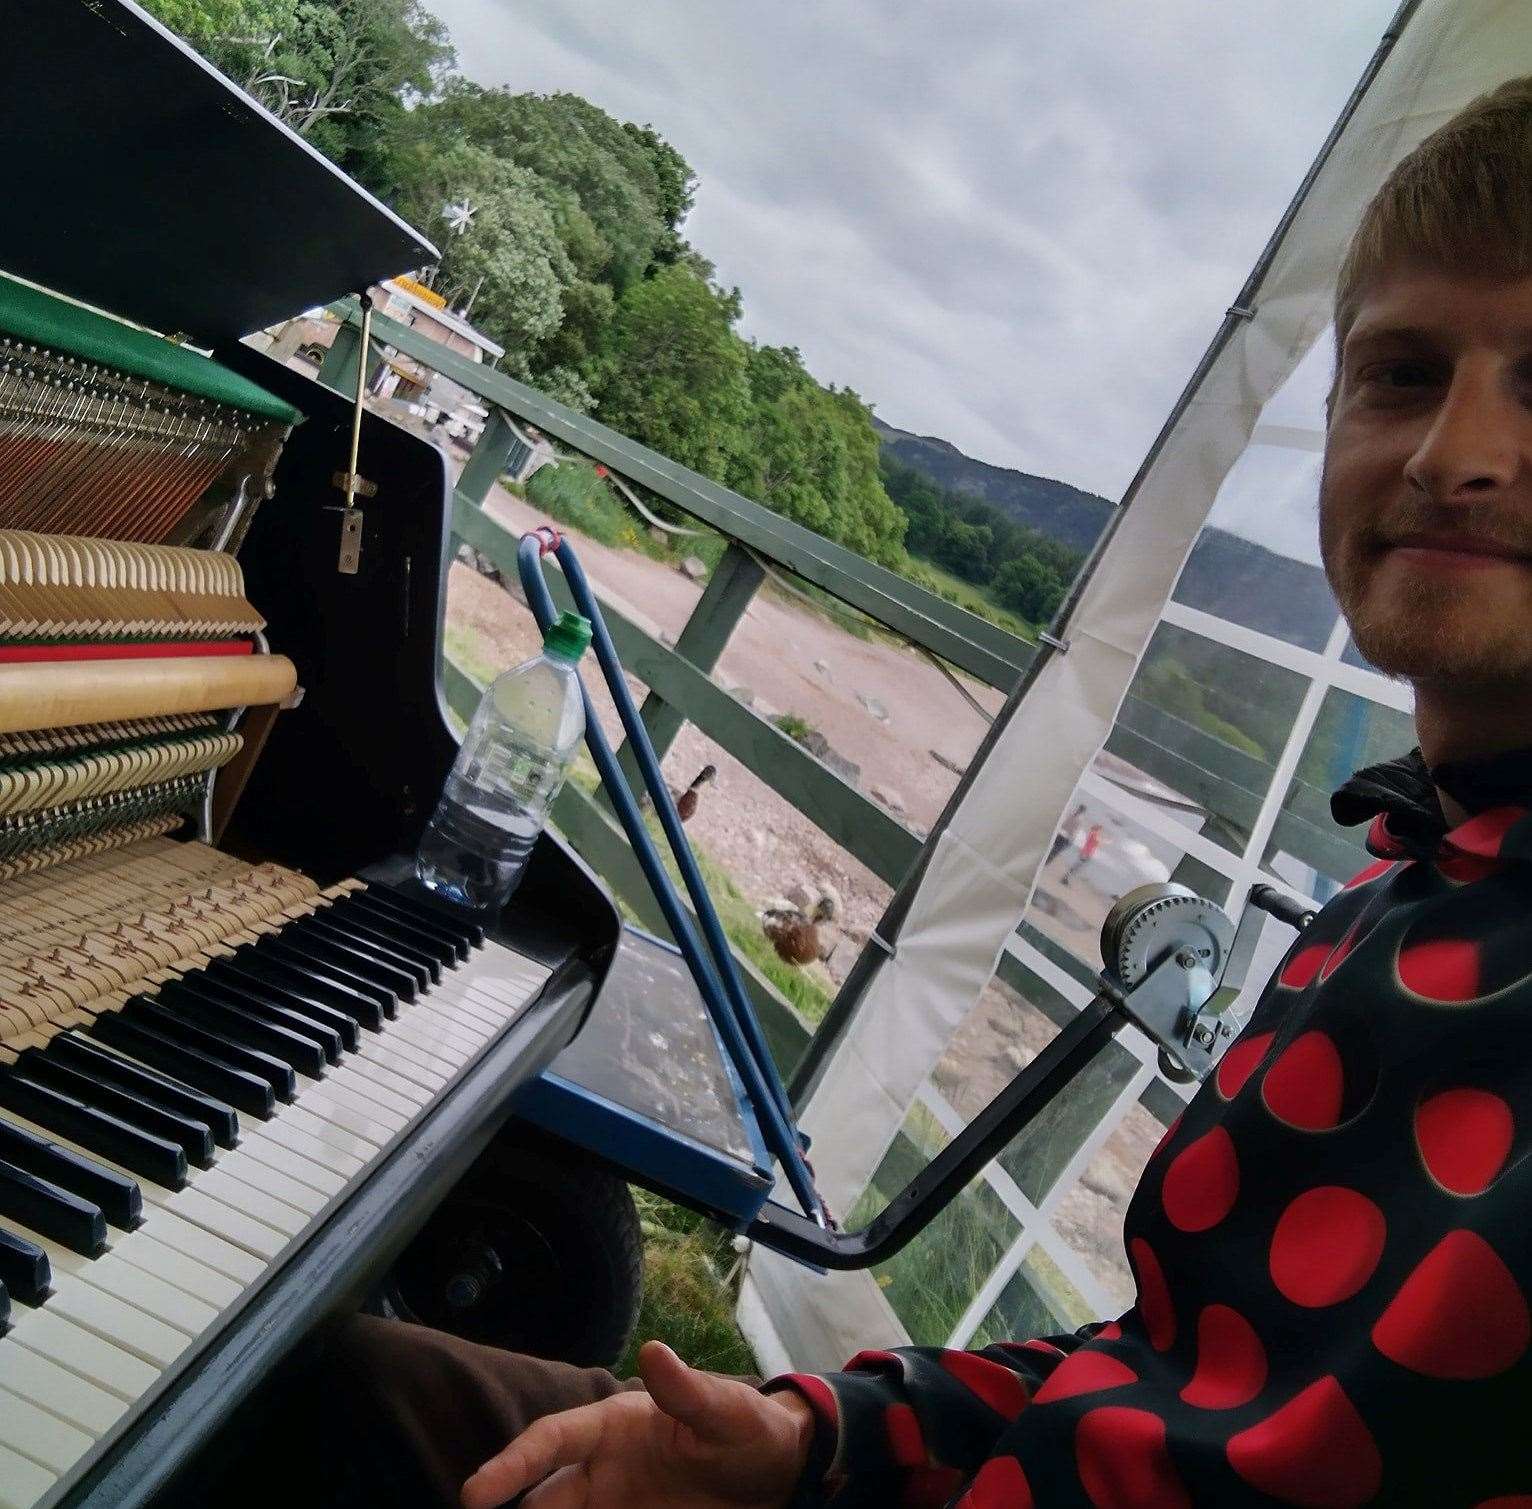 James Tofalli is travelling the UK with a piano performing at beauty spots to share his belief that music saves lives. Photos: SWNS